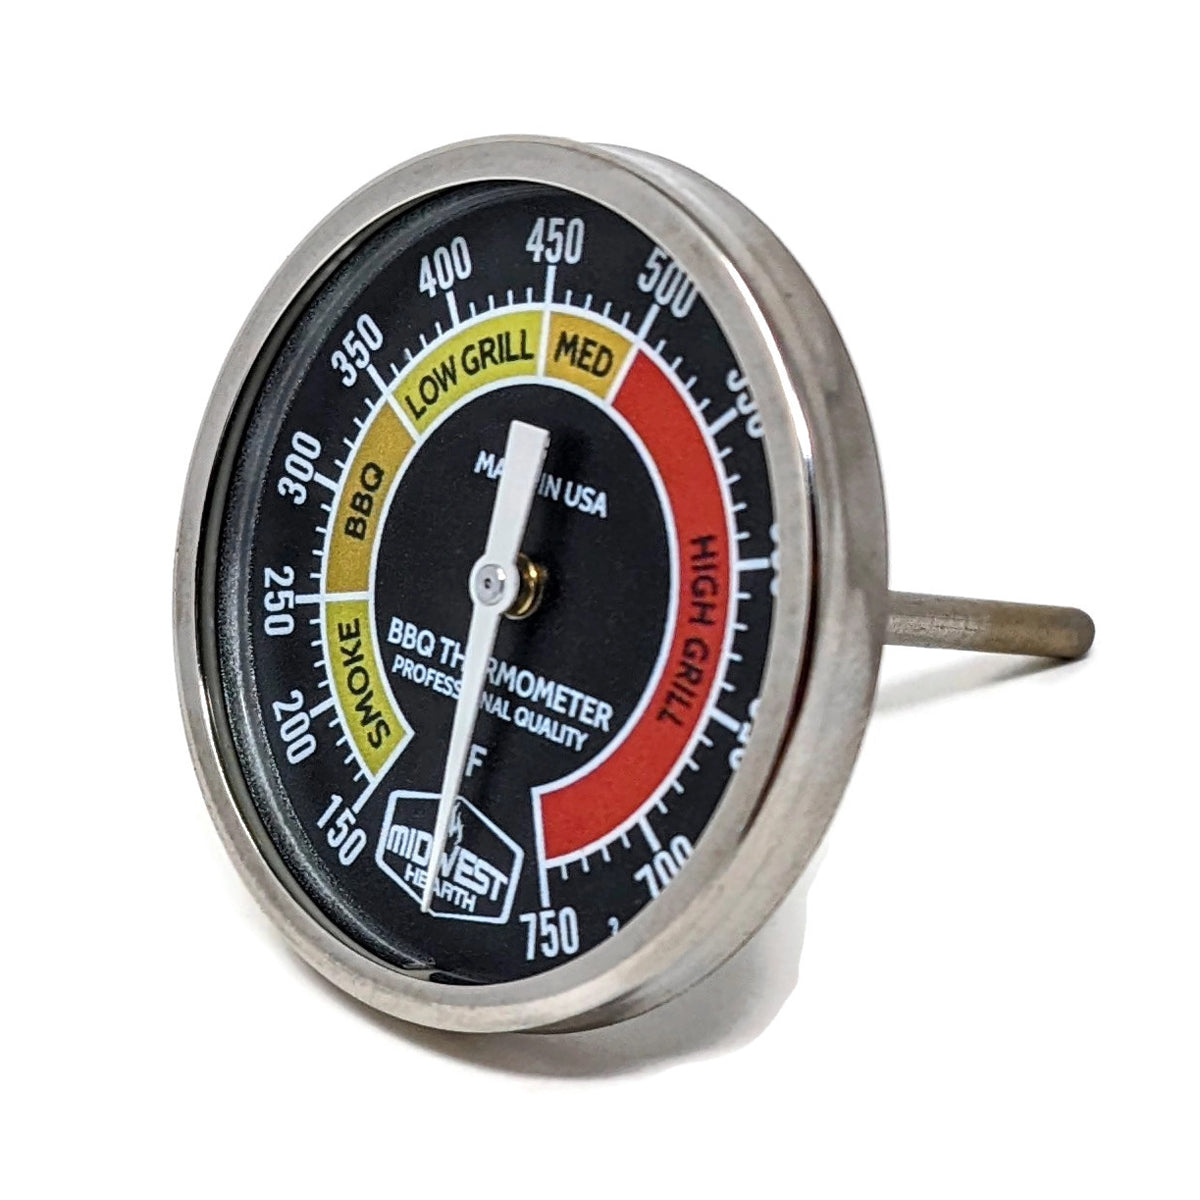 Heavy Duty BBQ Parts Round Grill Thermometer at